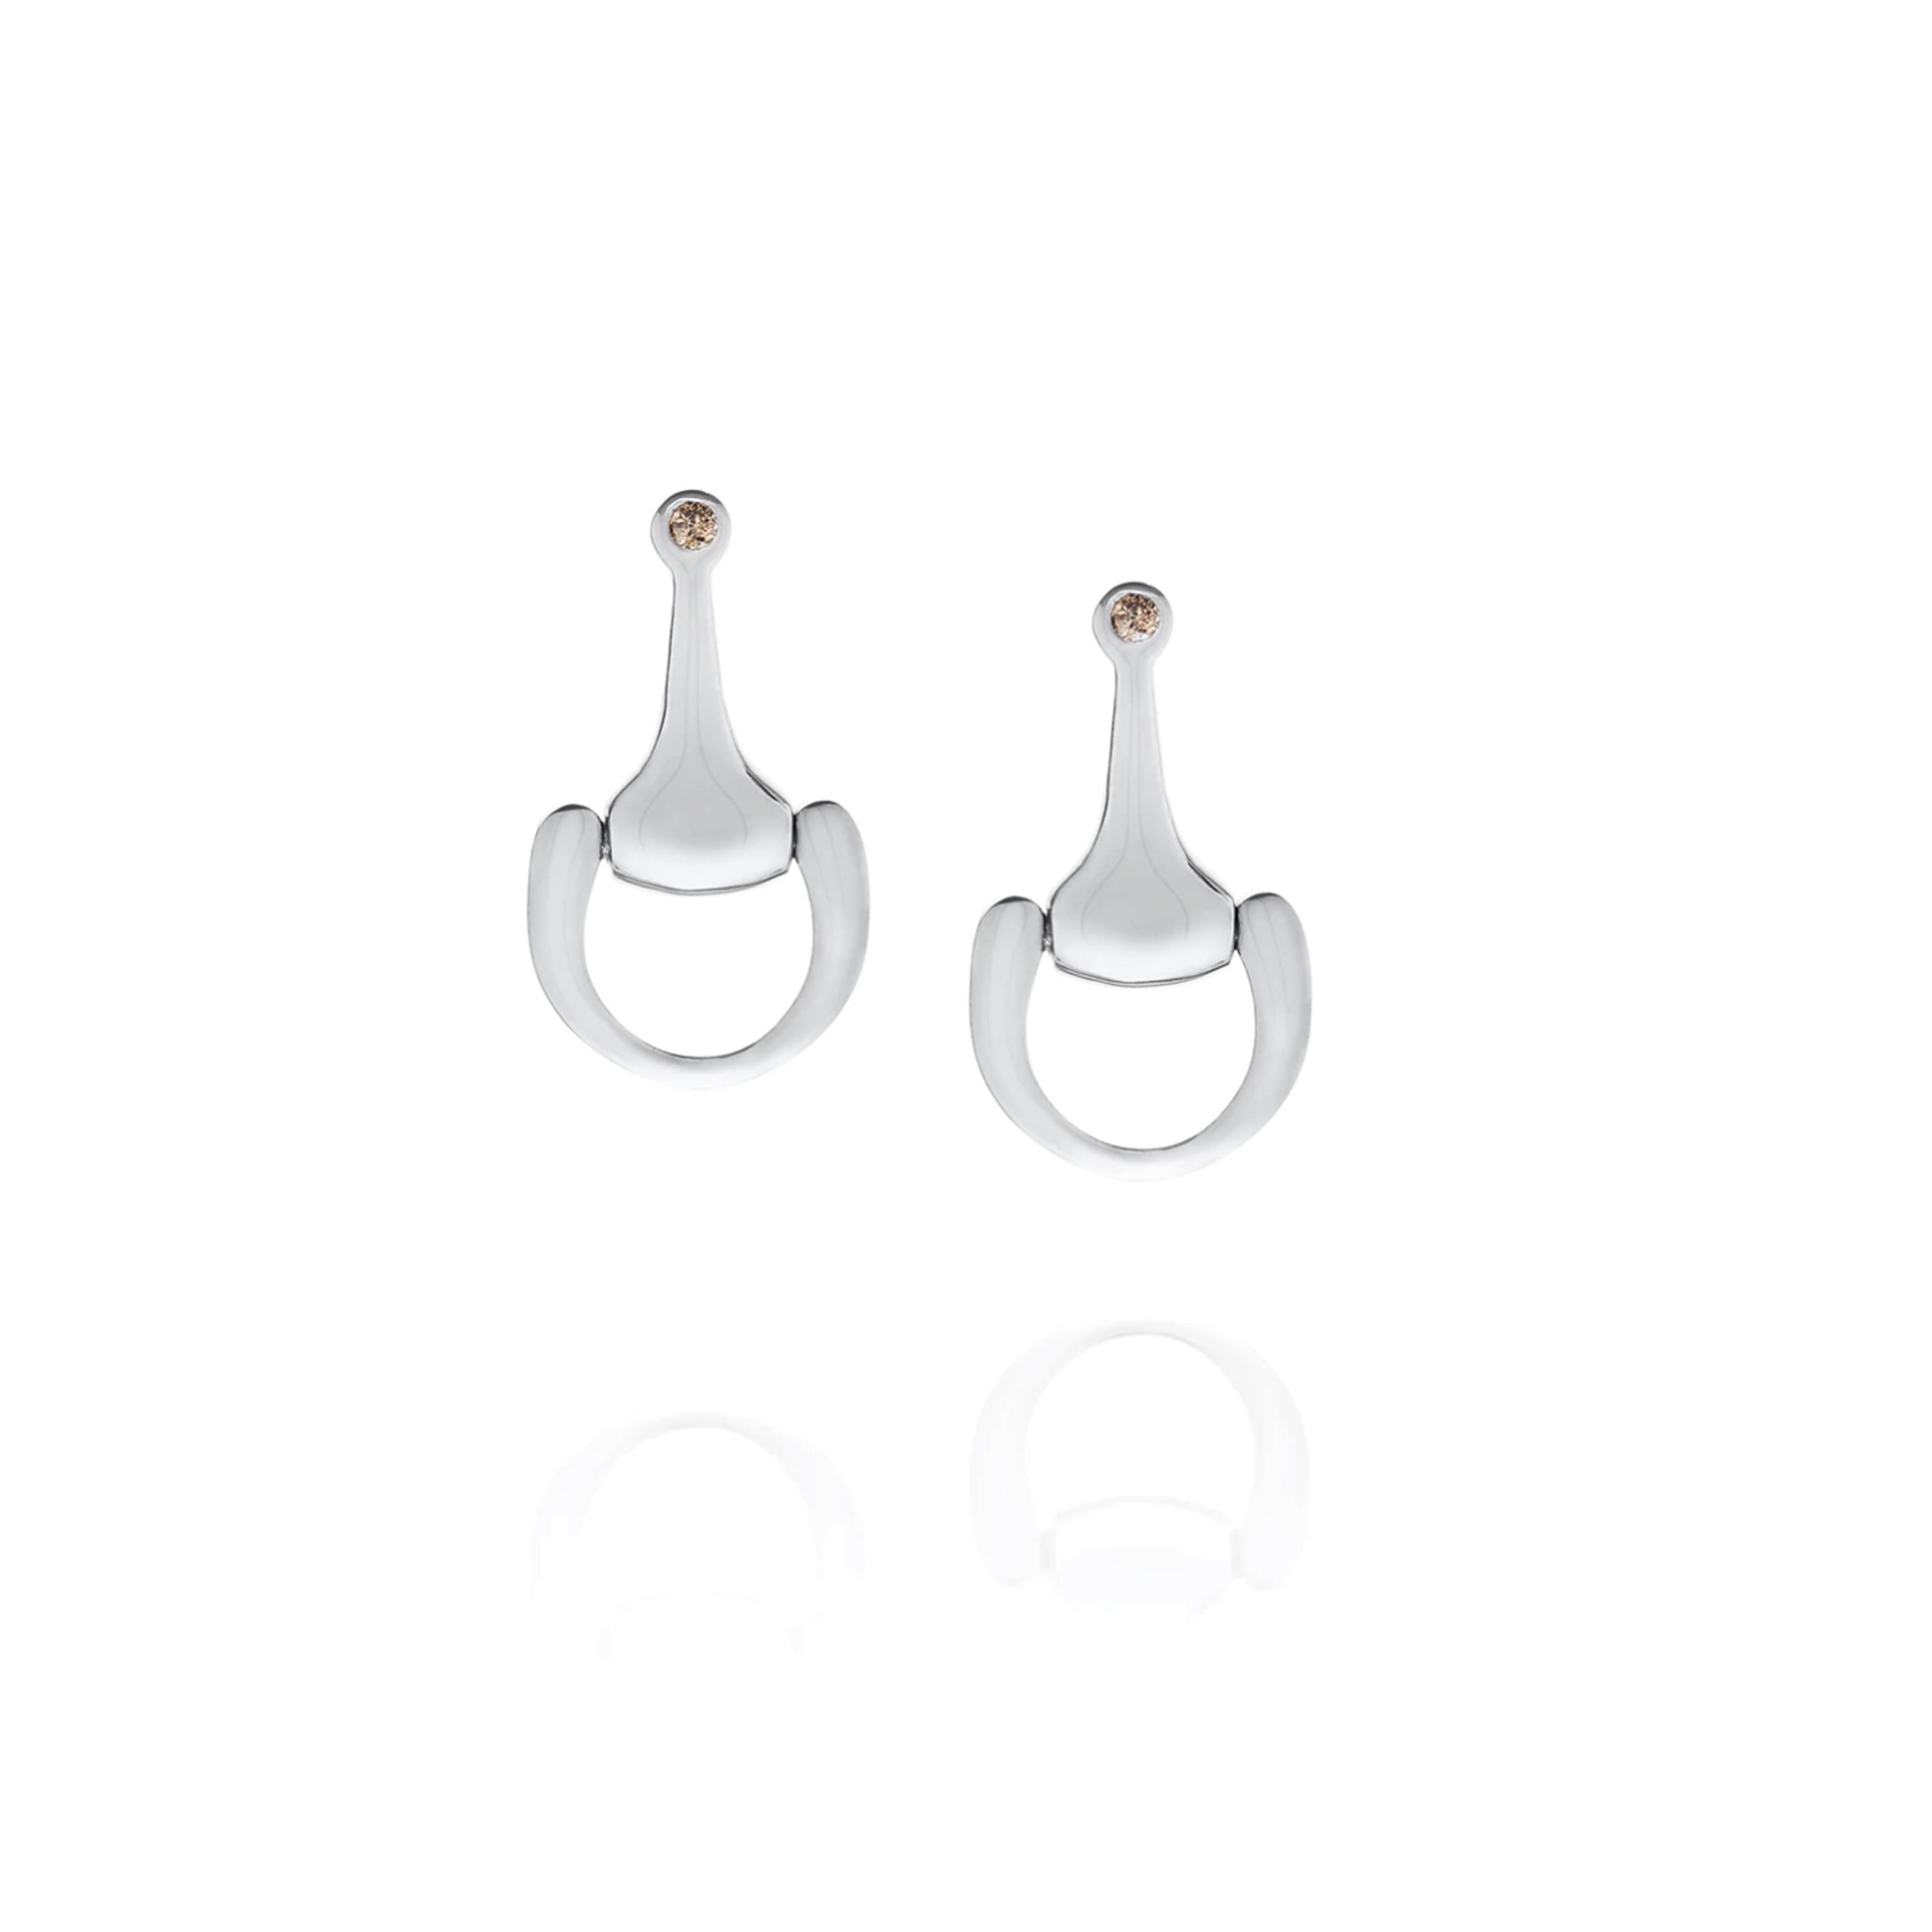 Part of the Vincent Peach Equestrian Collection, the Small Equestrian Bit Earrings have 14kt Yellow Gold stirrups covered in round, White Diamonds with a hinge to let the bottom move with you. These luxurious Equestrian Bit Earrings are 1